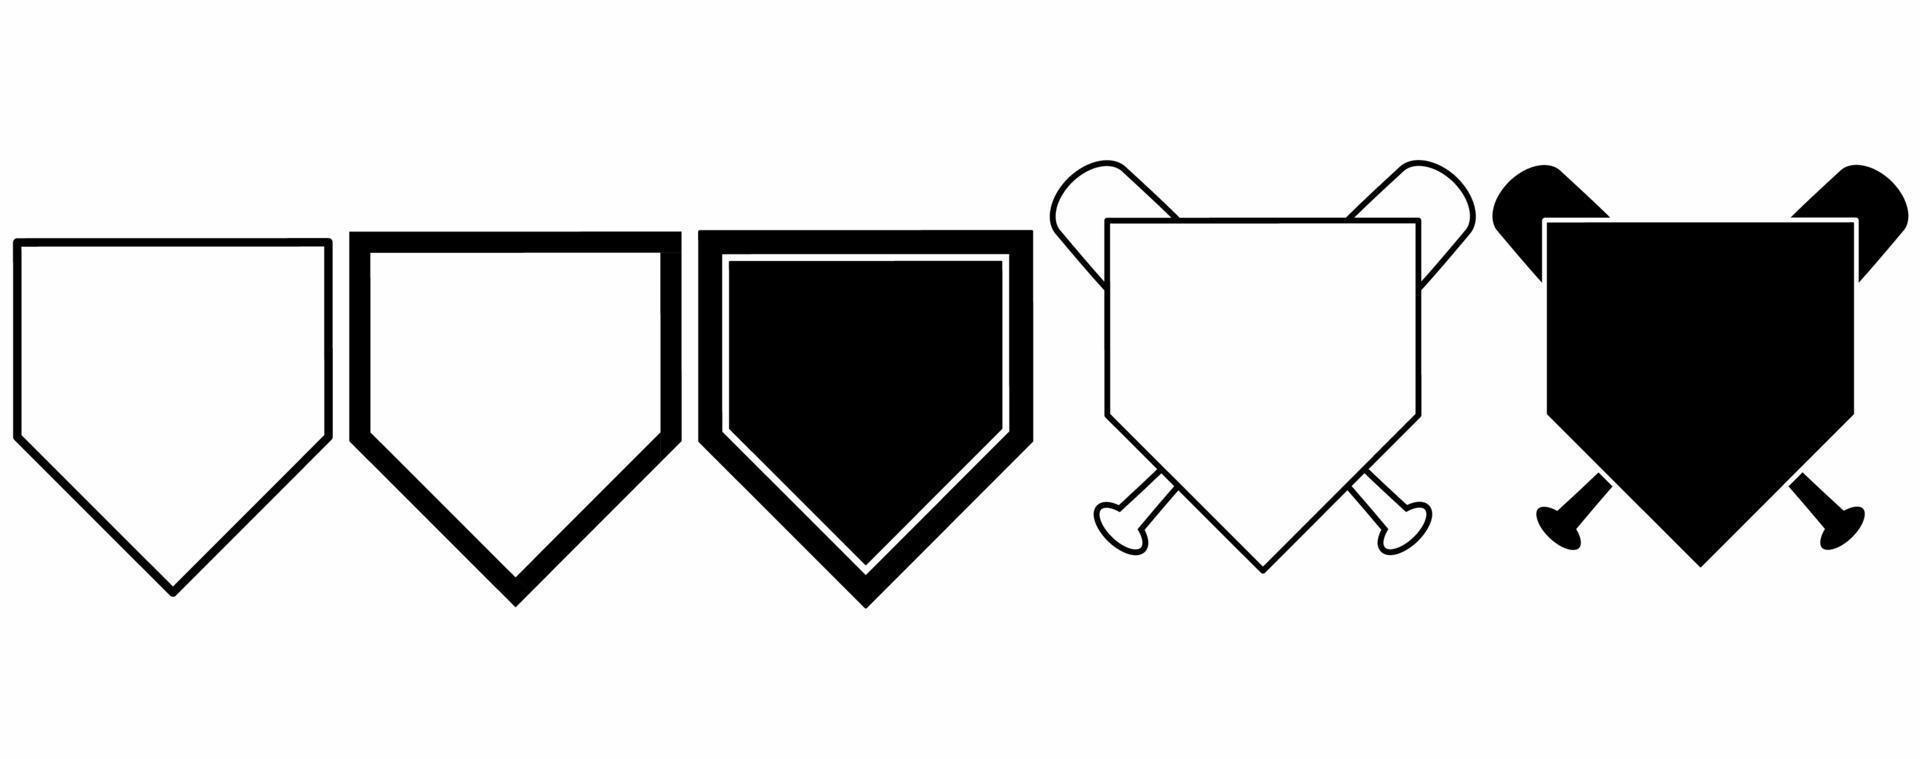 outline silhouette home plate baseball icon set isolated on white background vector